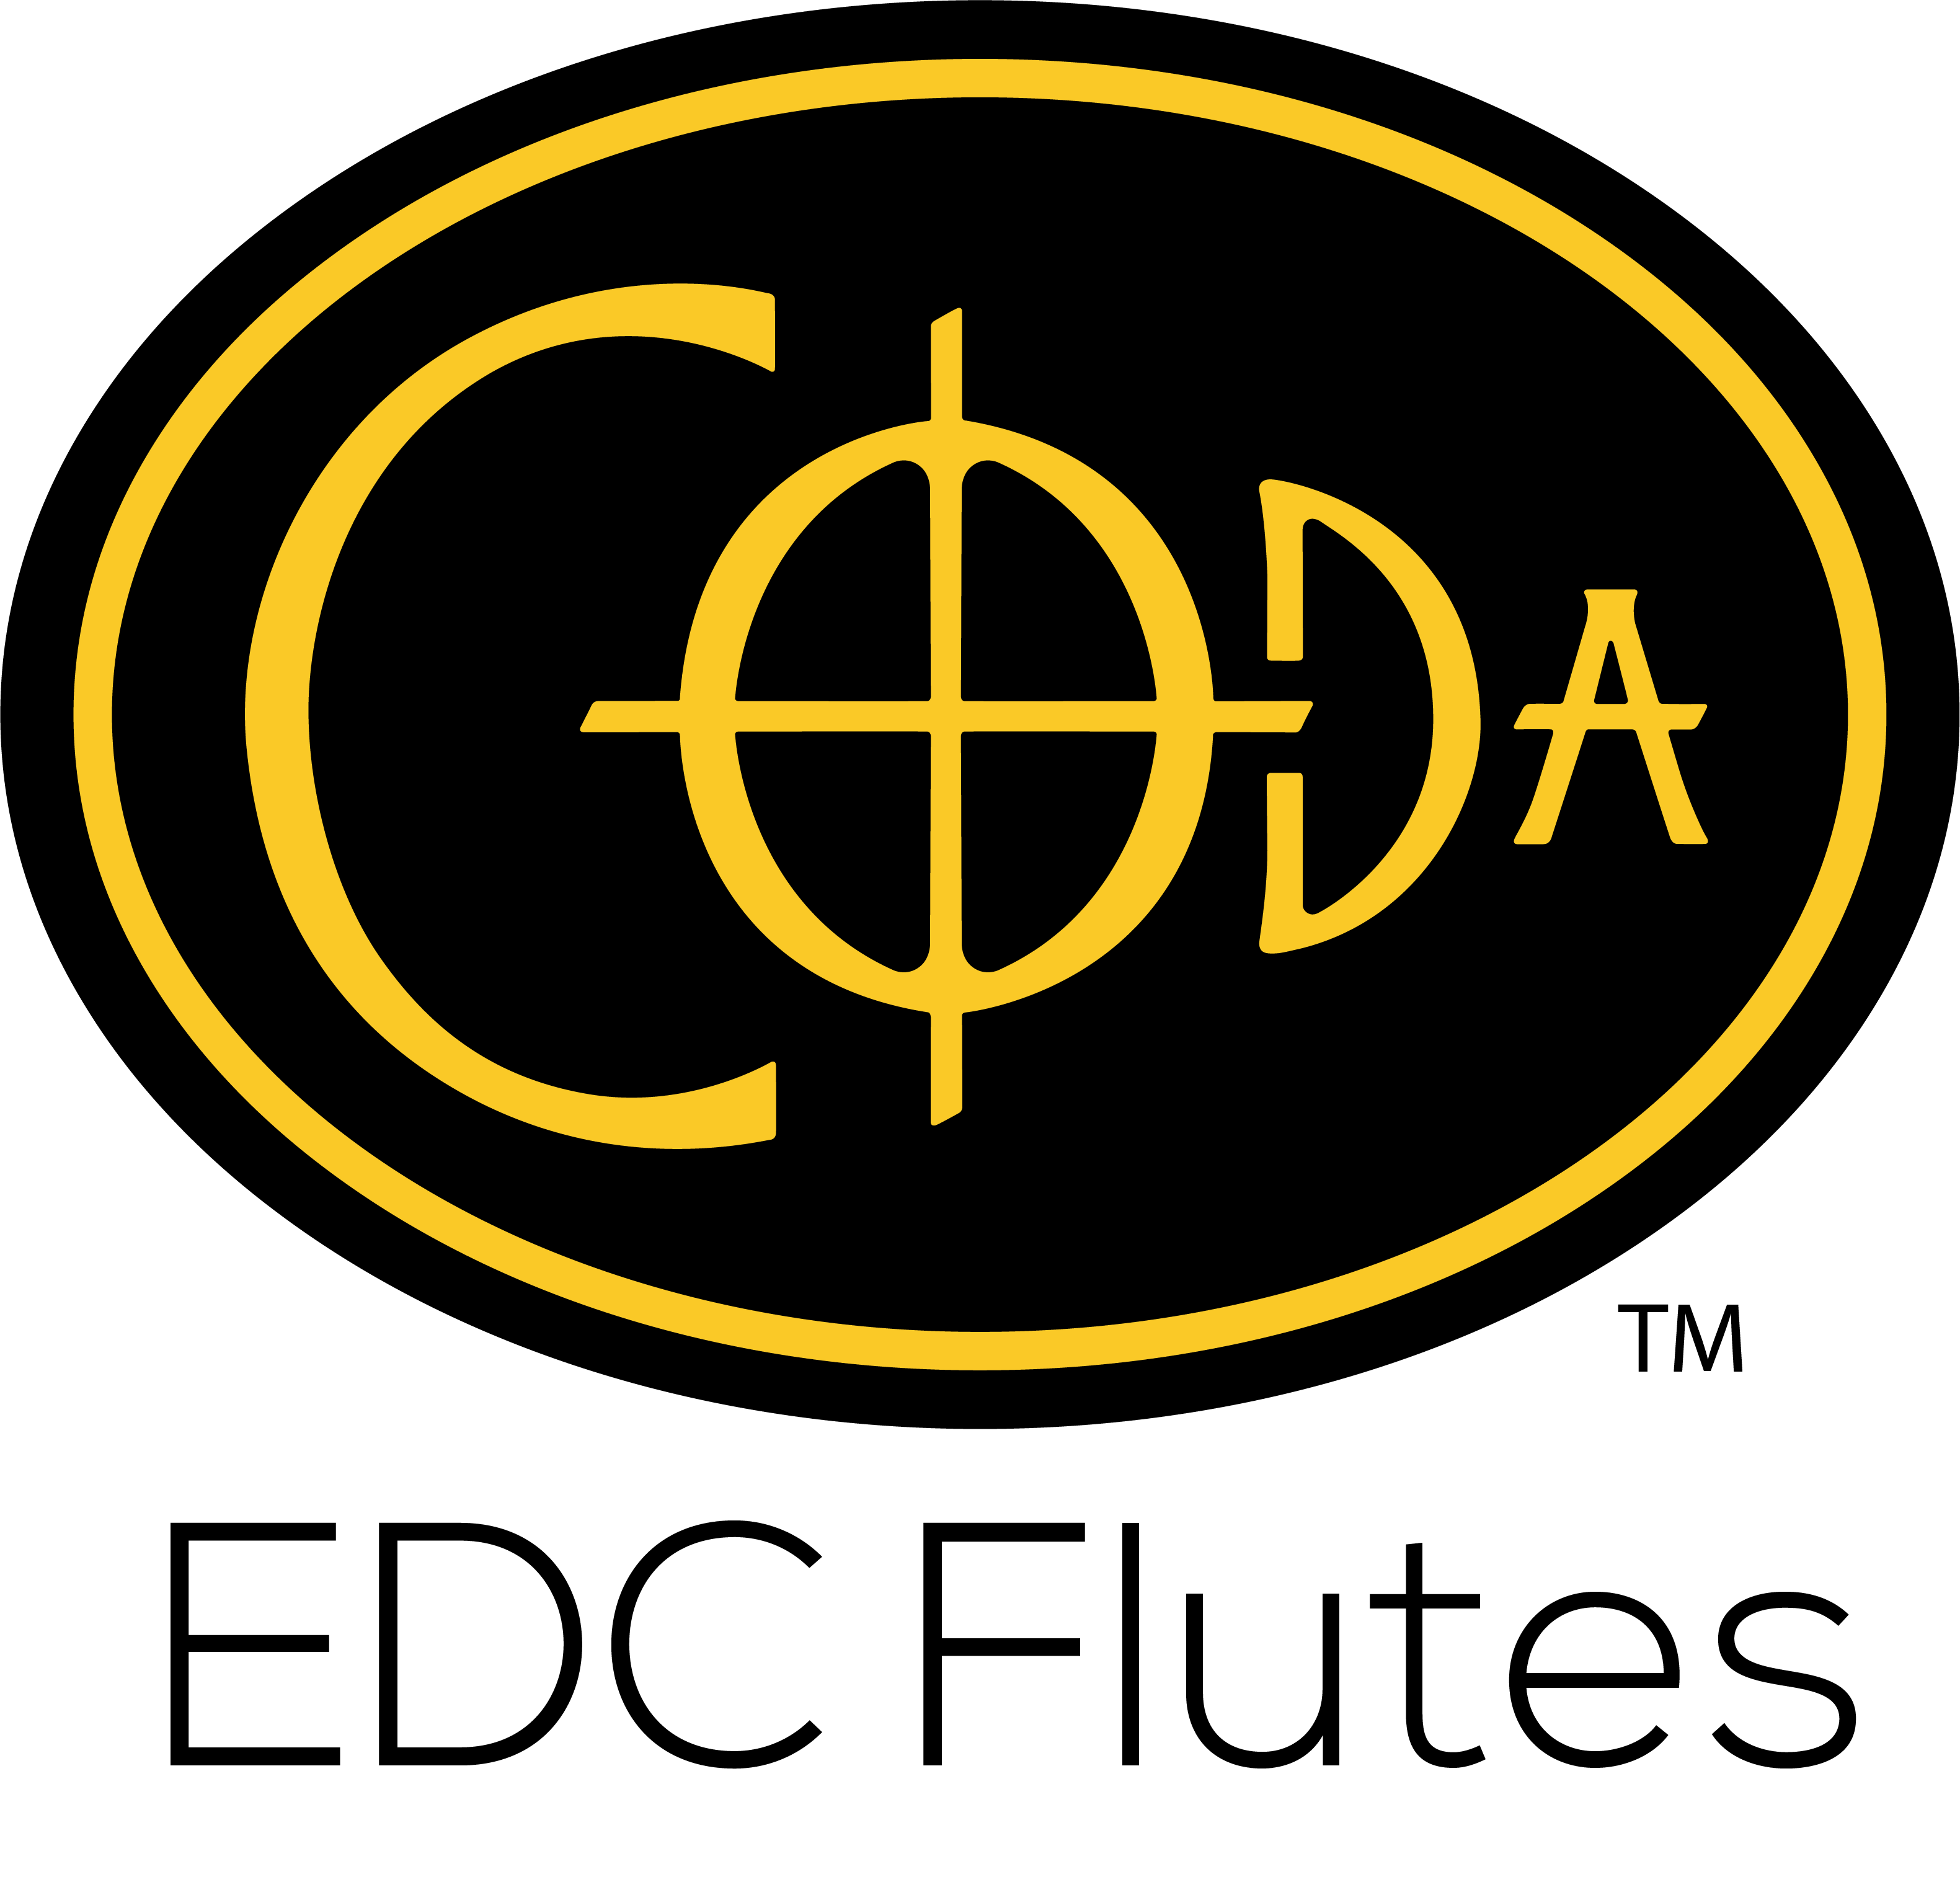 Coda EDC Flutes Logo: an oval surrounds the letters C, O, D, A. The O is shaped like the Coda symbol in music notation.